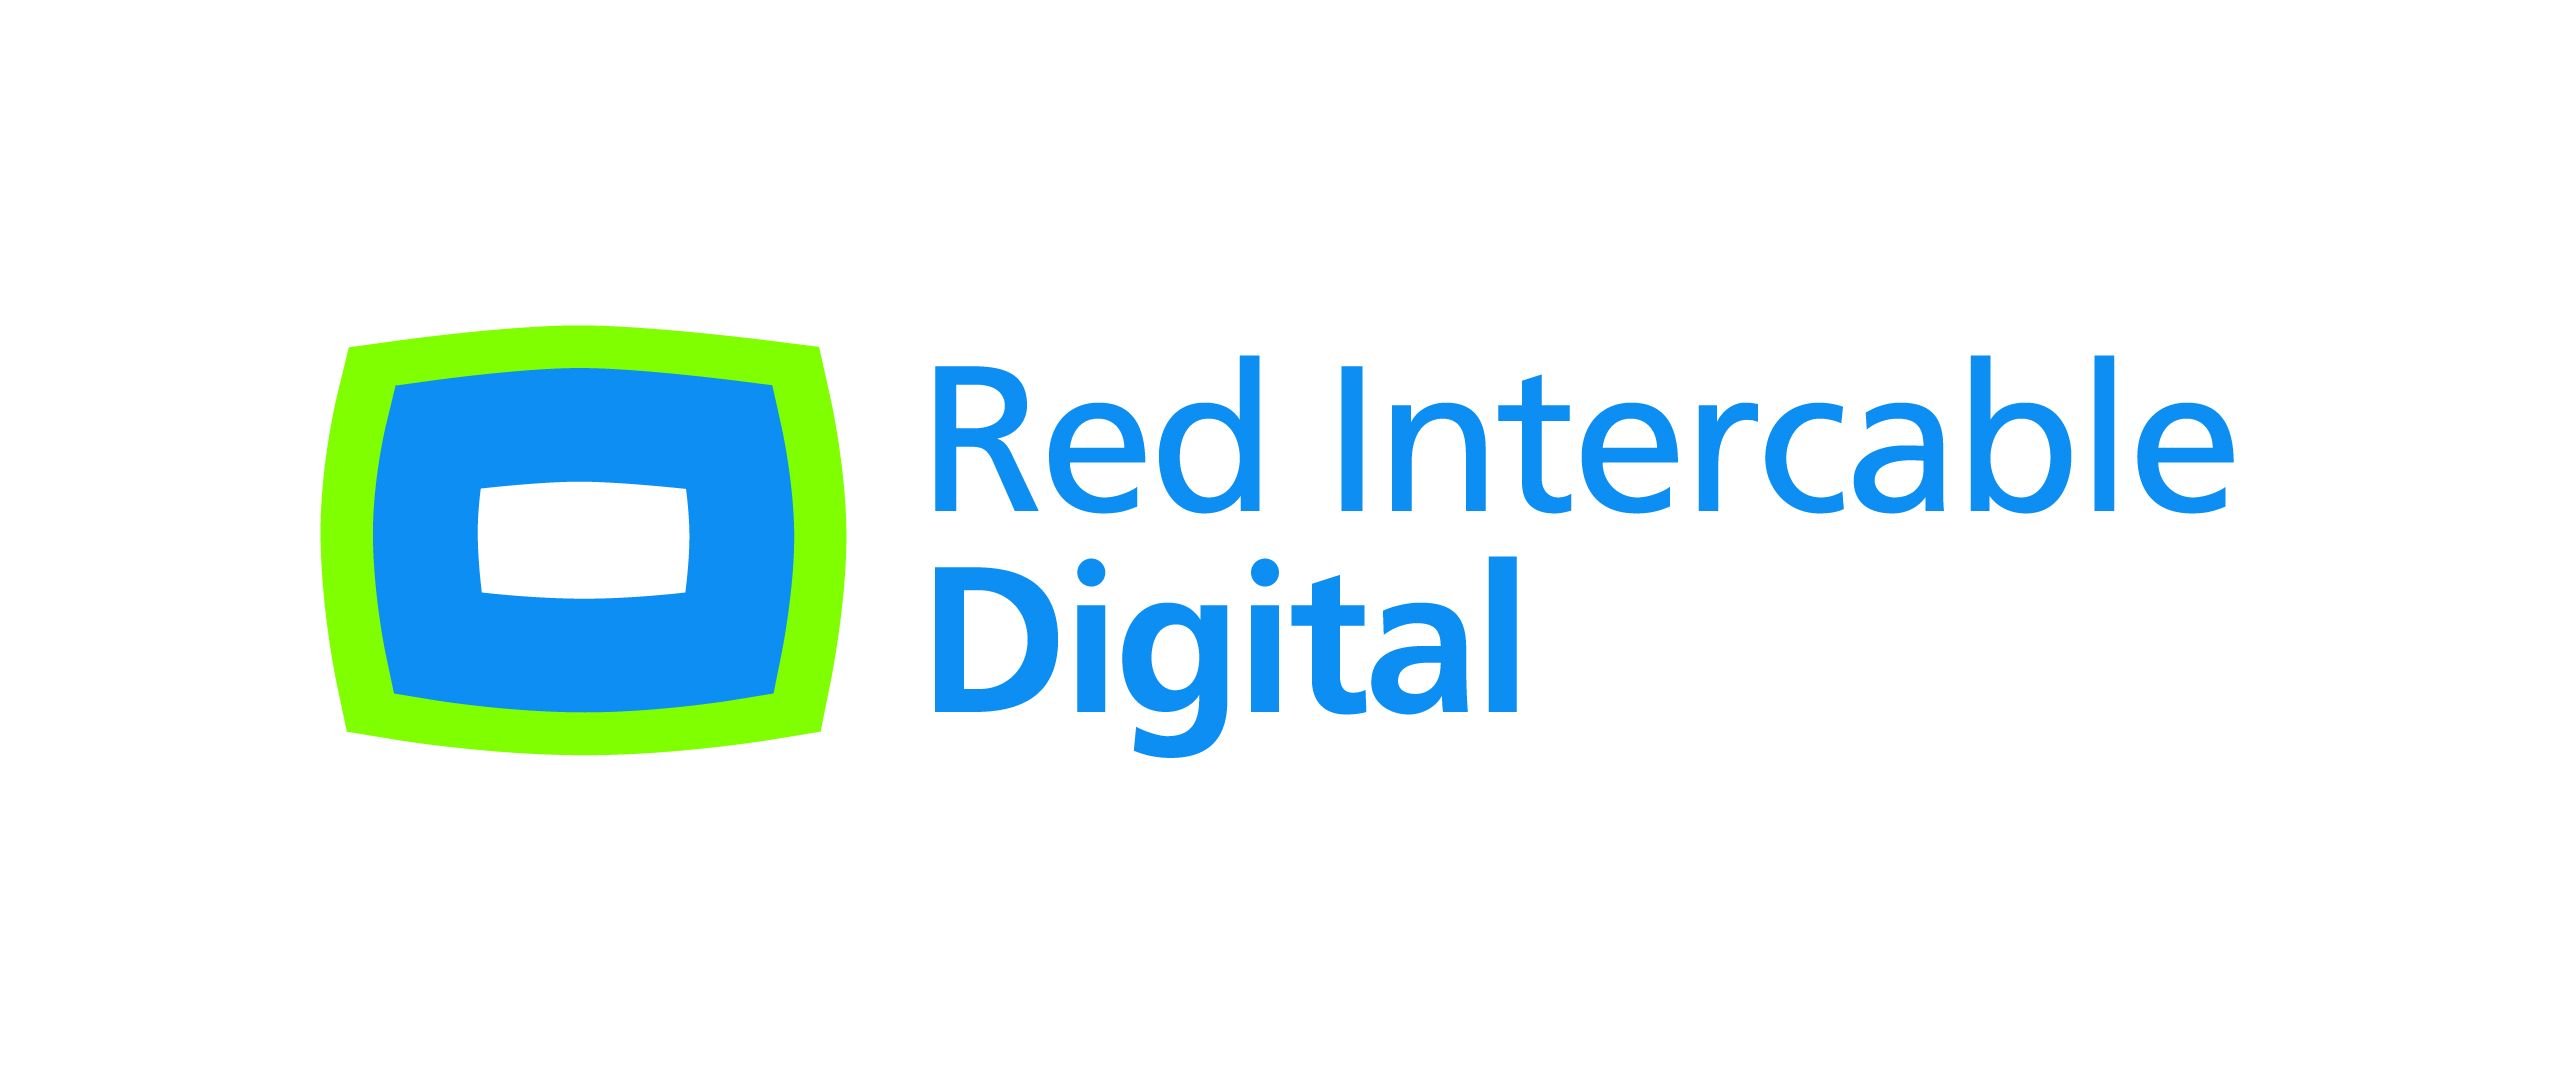 Red Intercable Digital